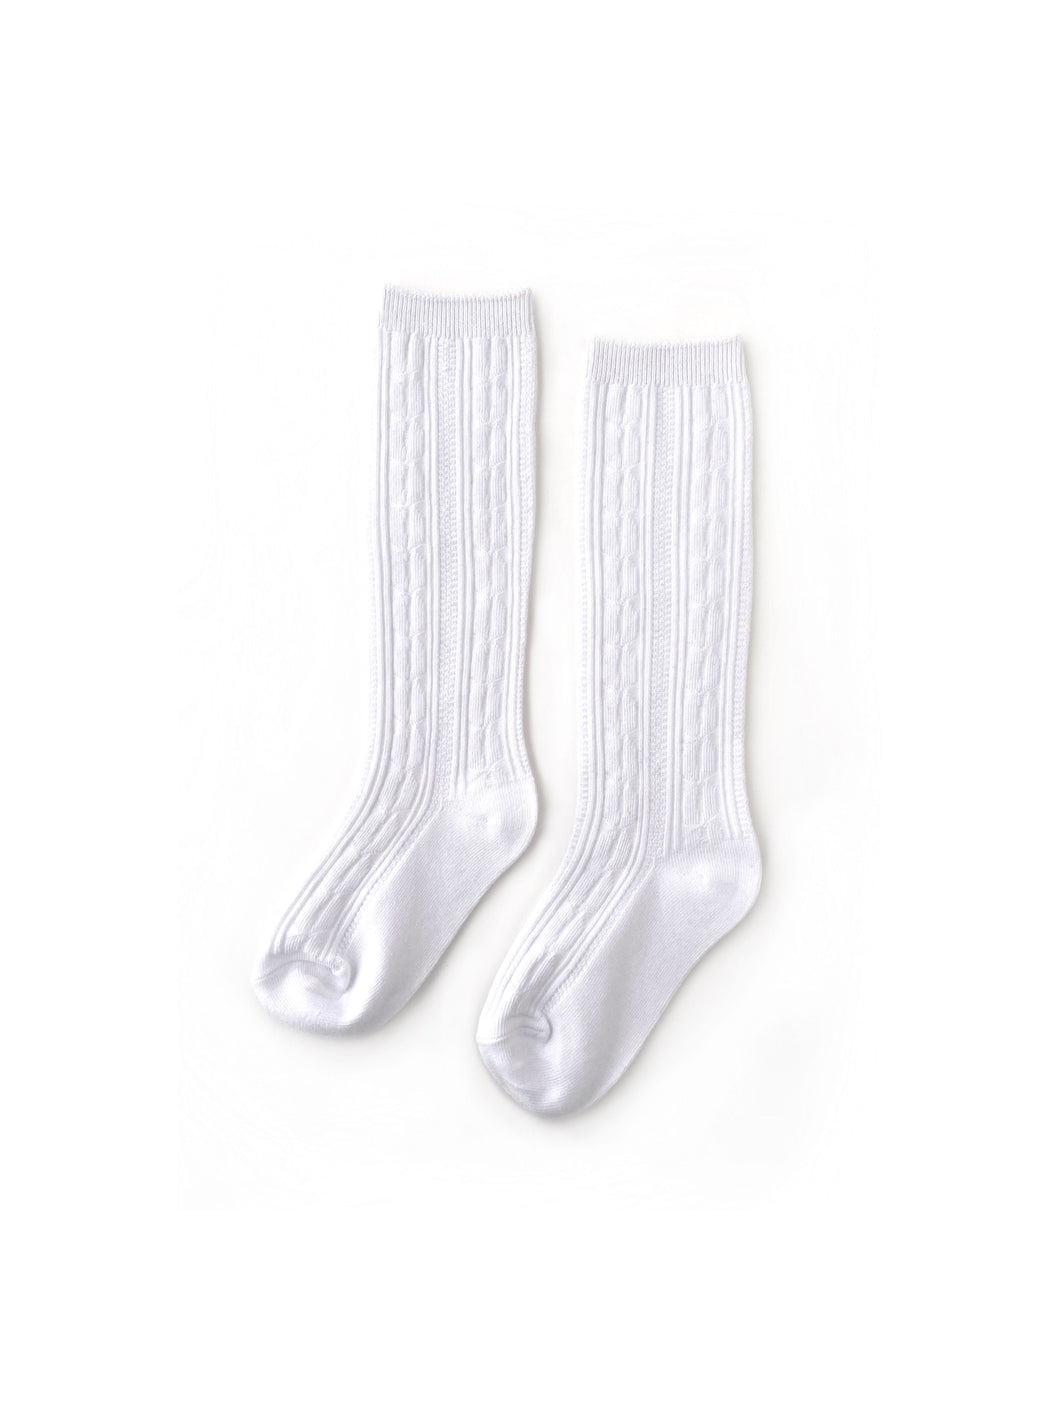 Little Stocking Co. White Cable Knit Knee High Socks